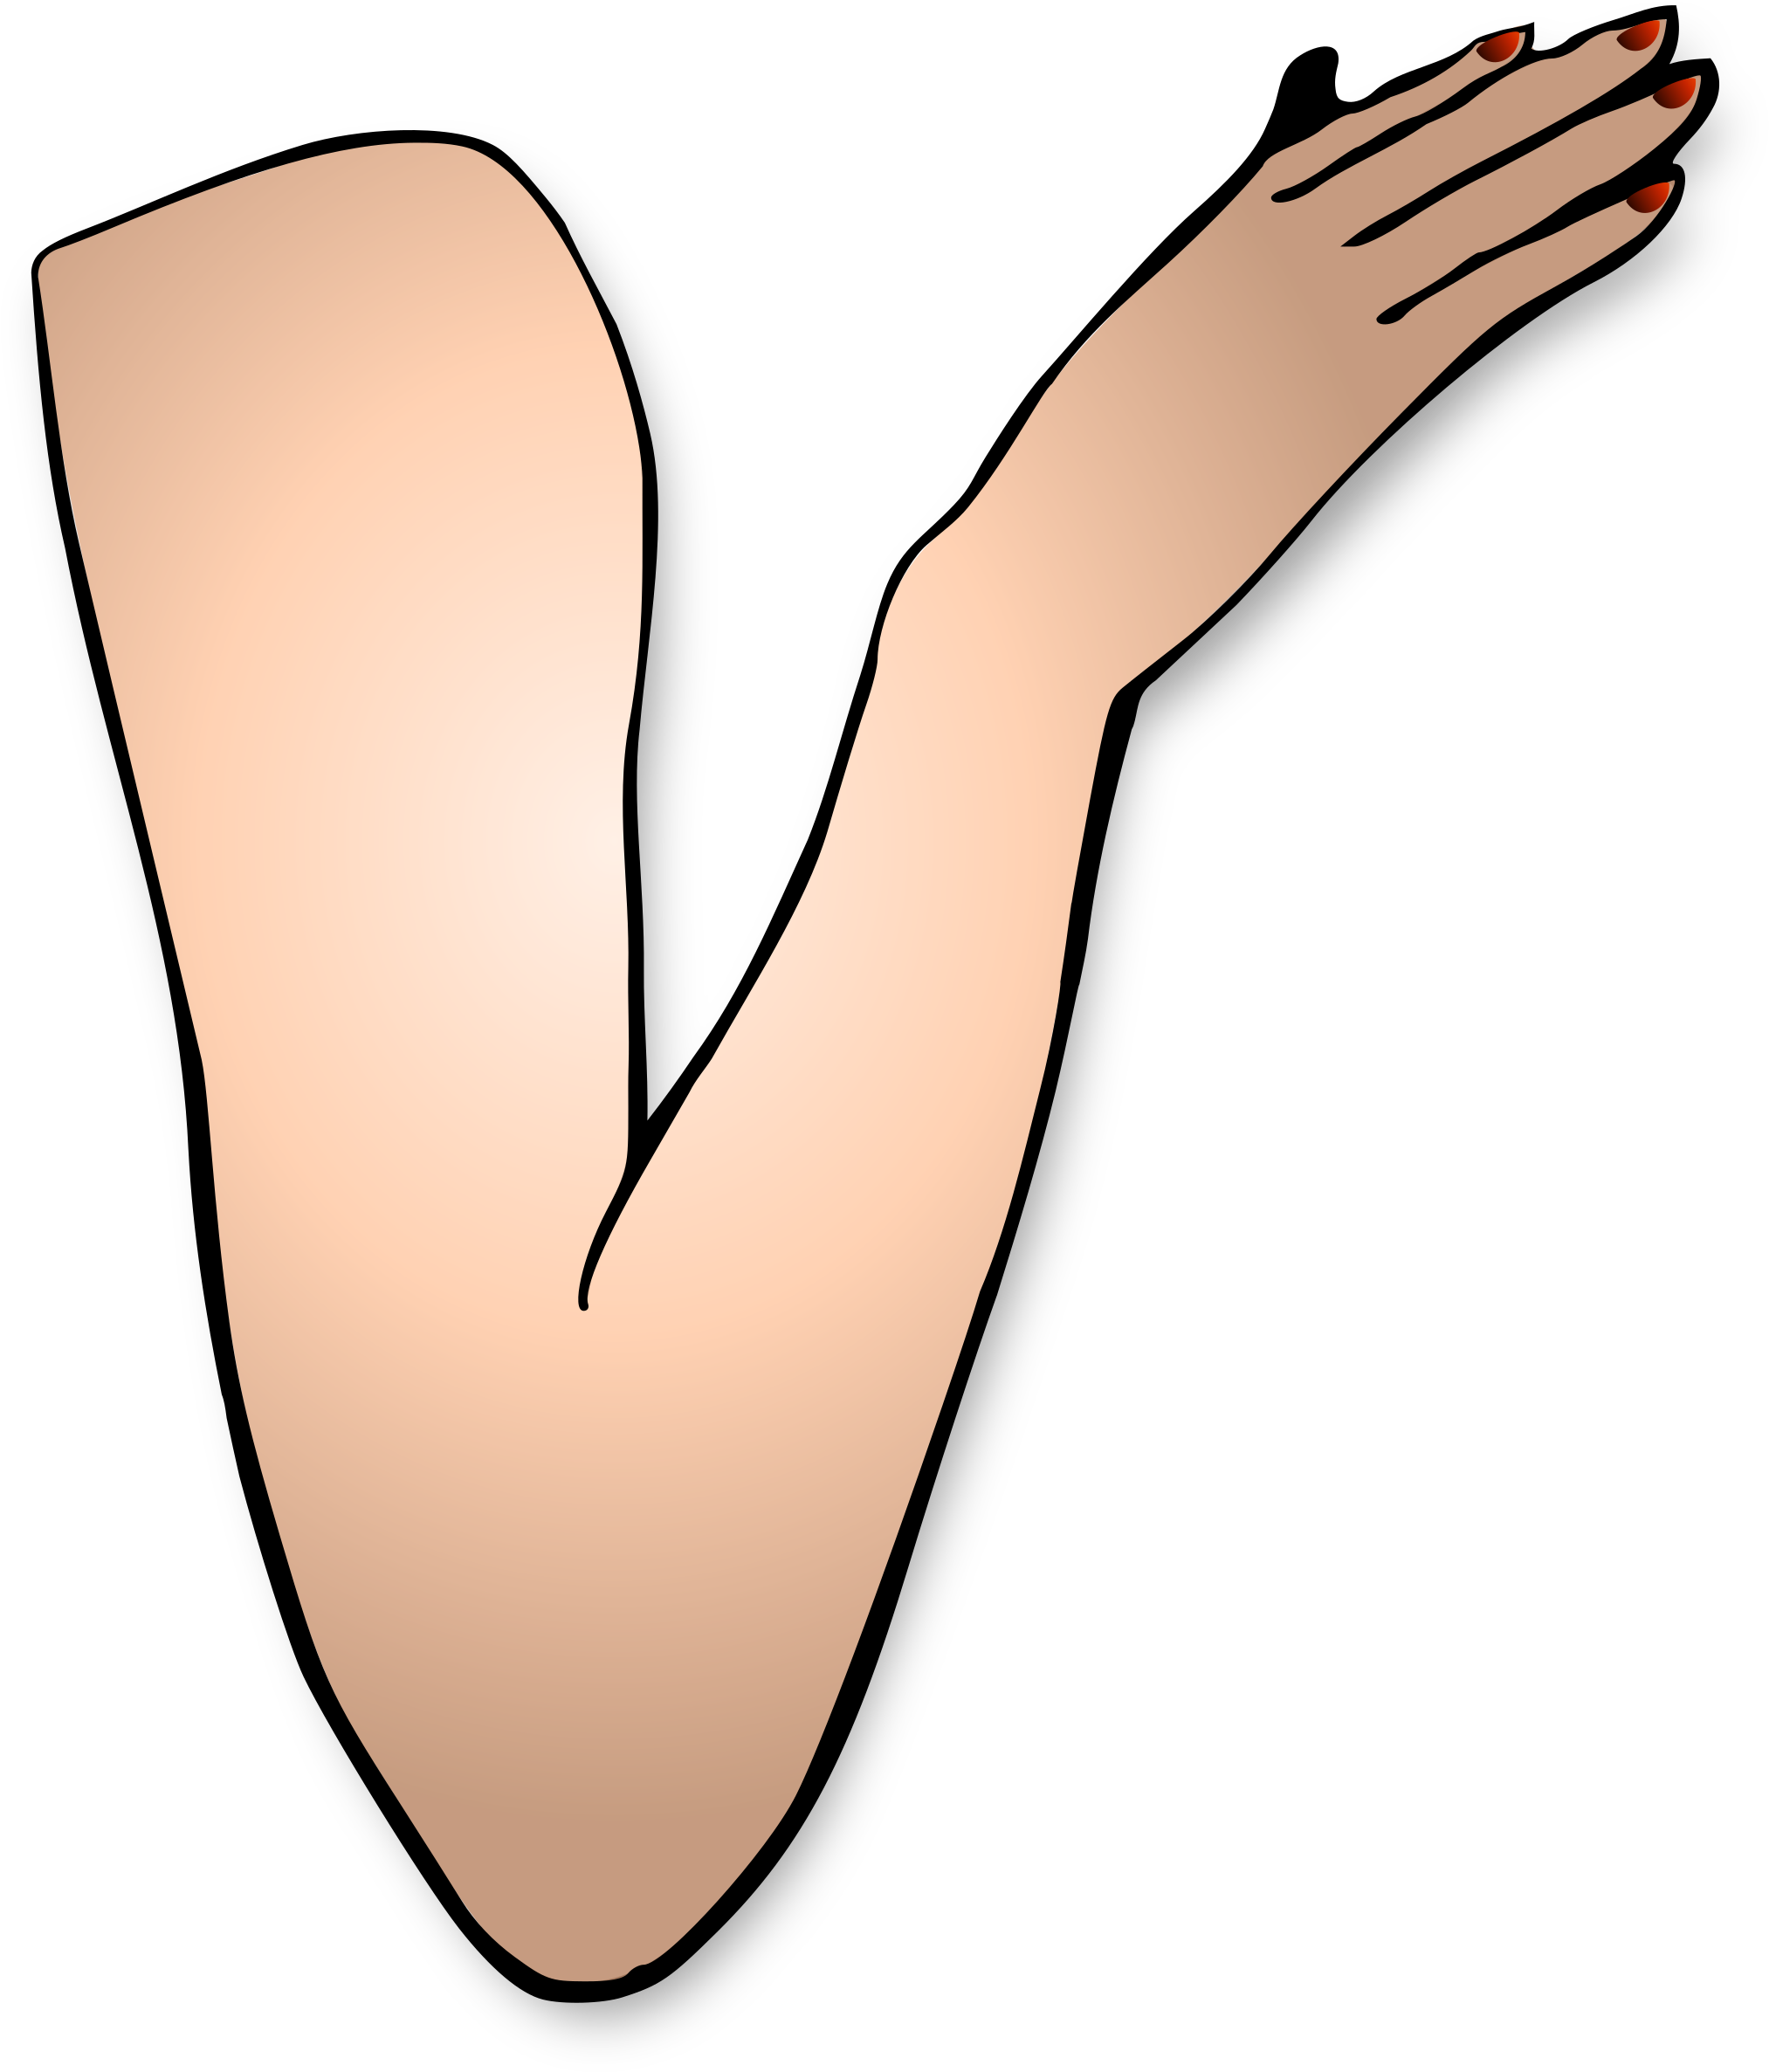 A Hand With A Black Background